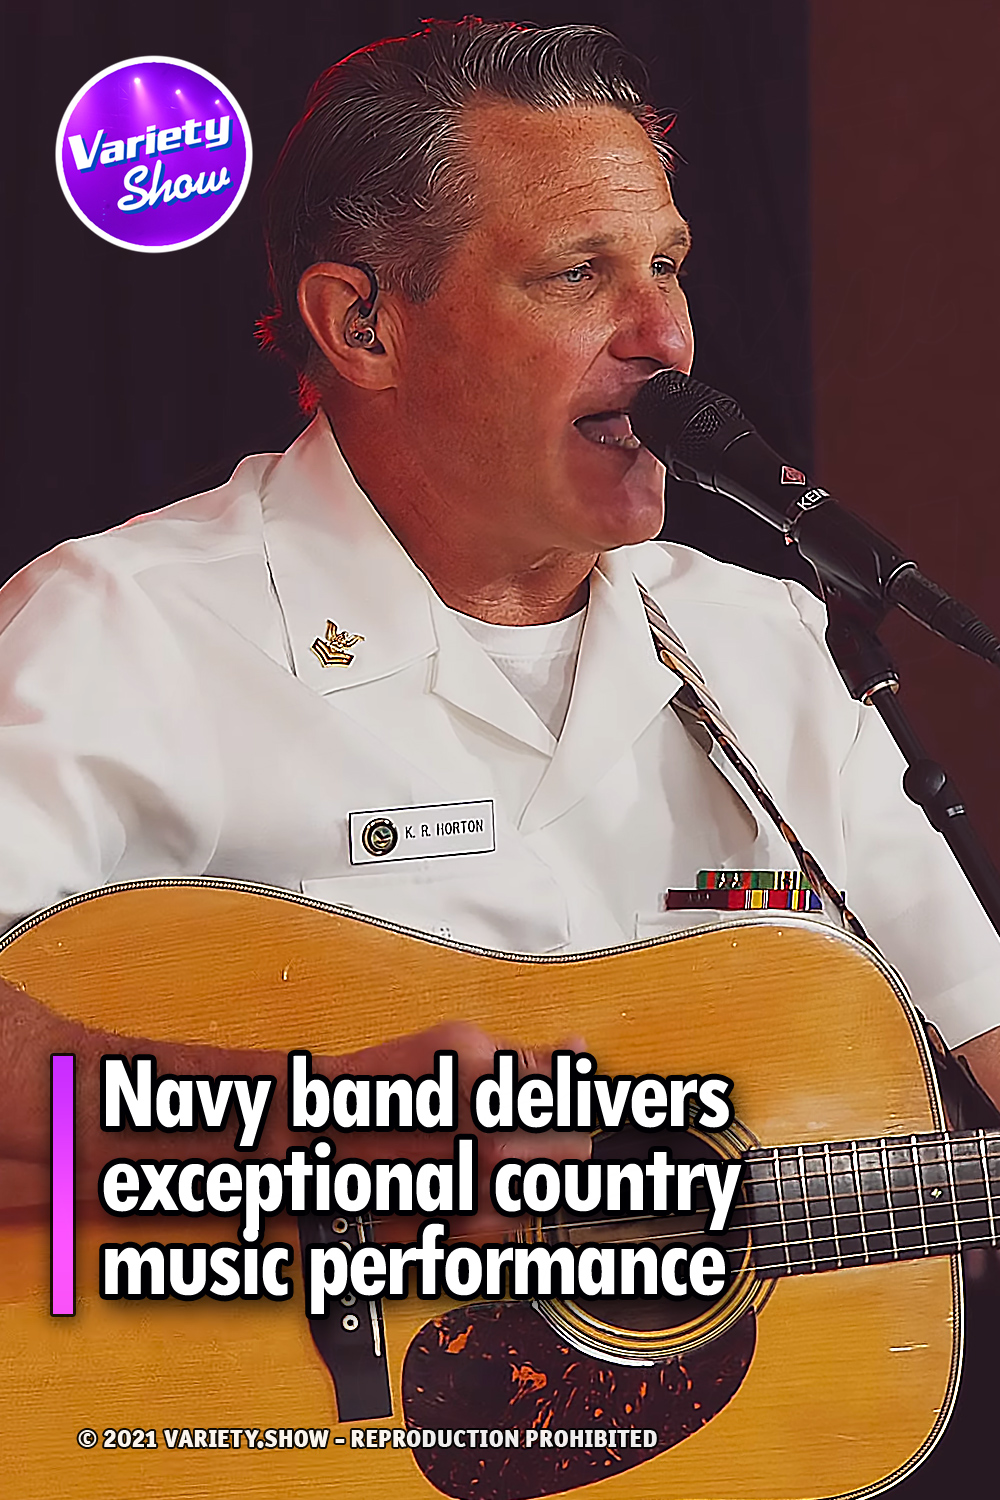 Navy band delivers exceptional country music performance